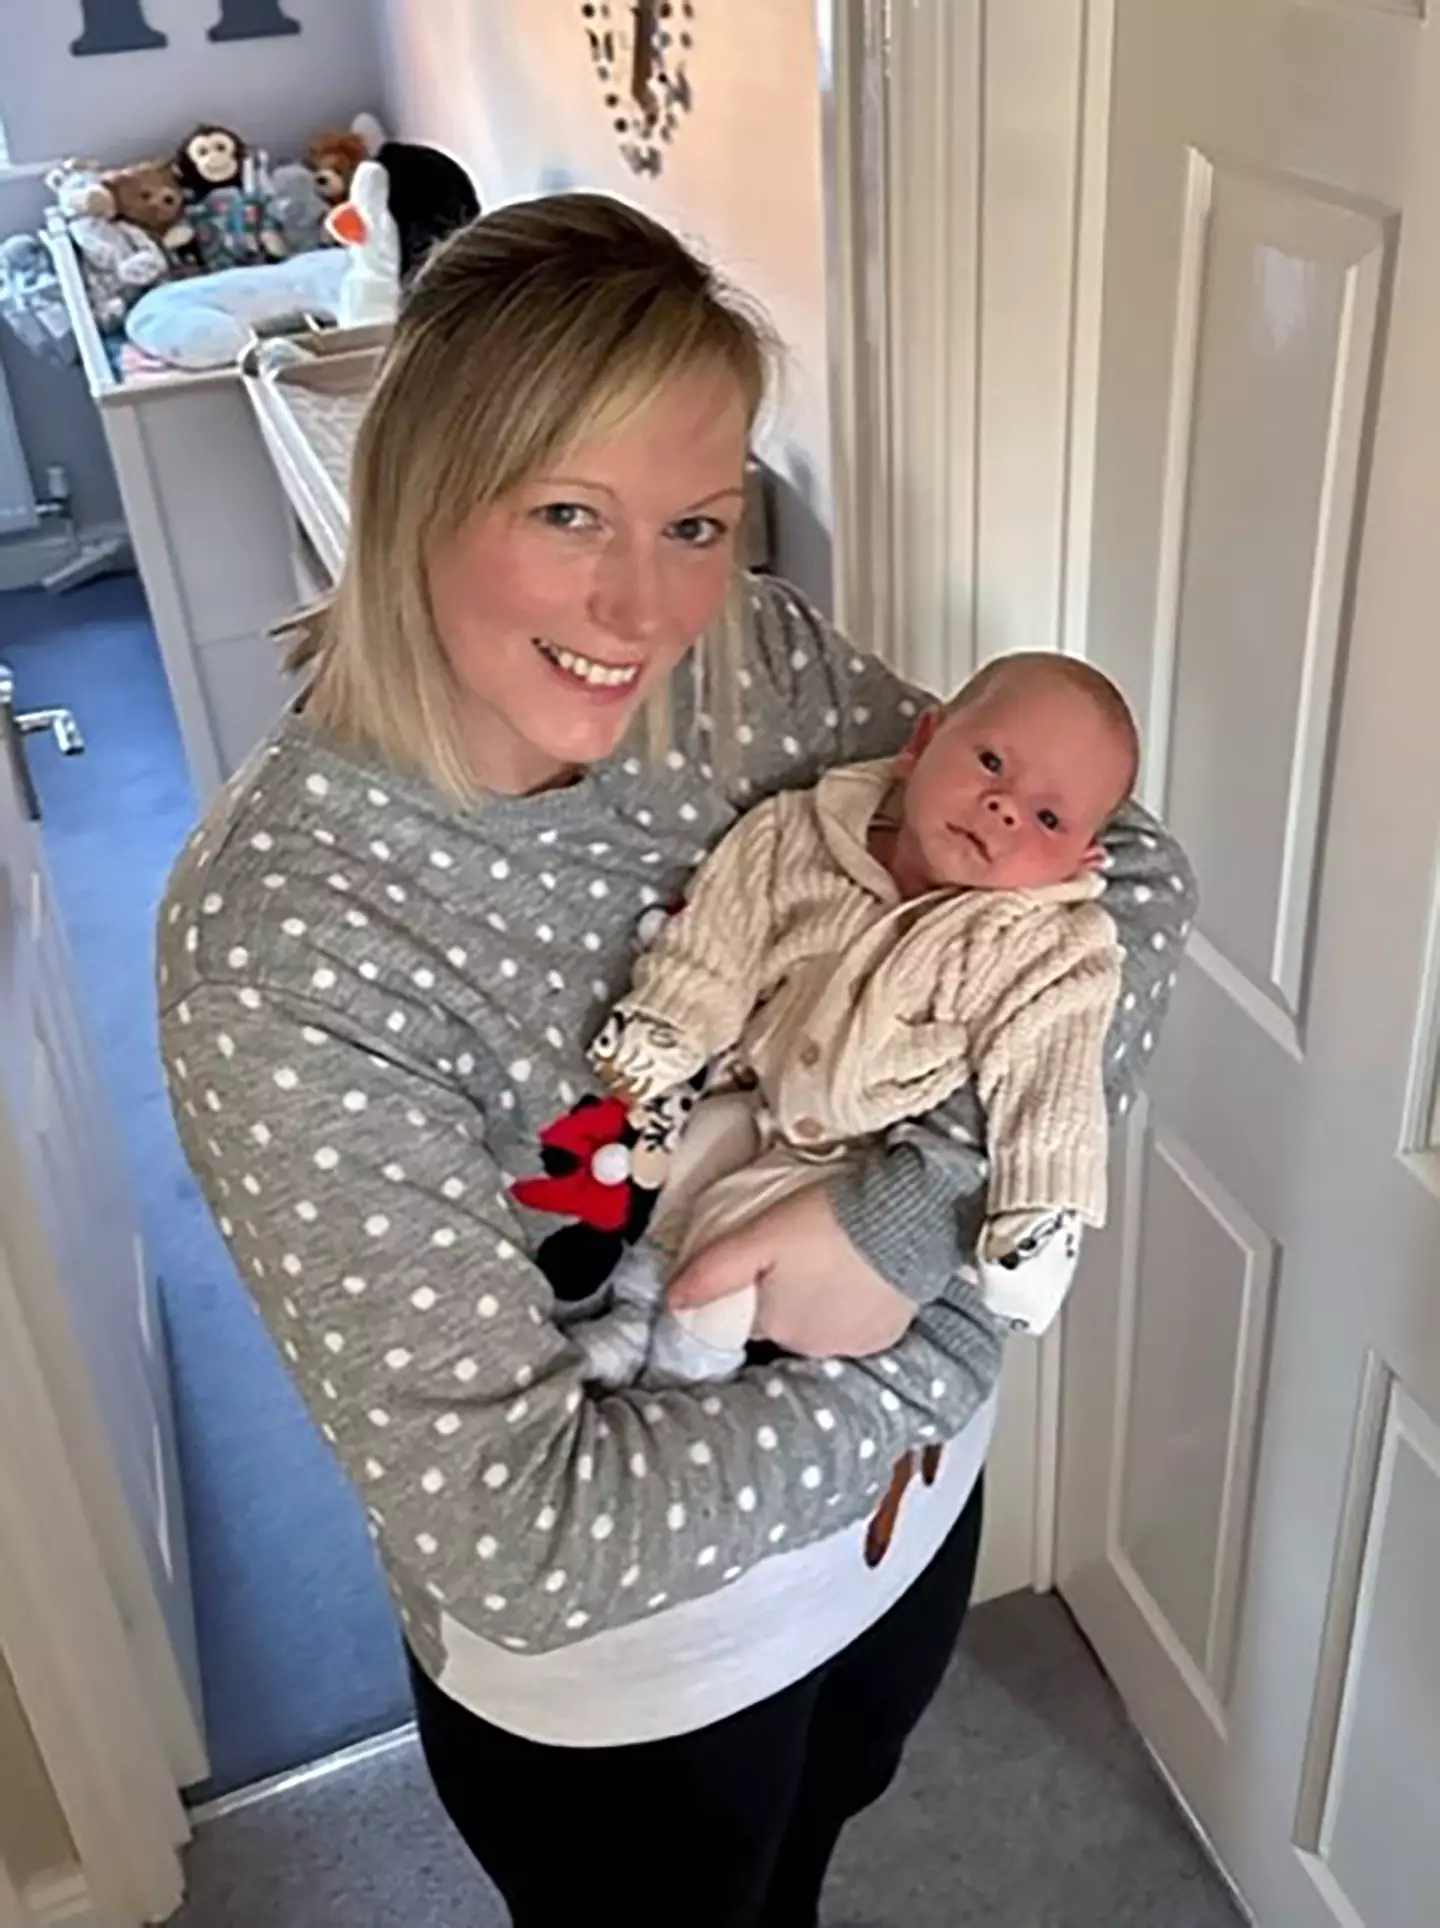 After having a miscarriage, Stacey thought her dream of becoming of mum might be over.